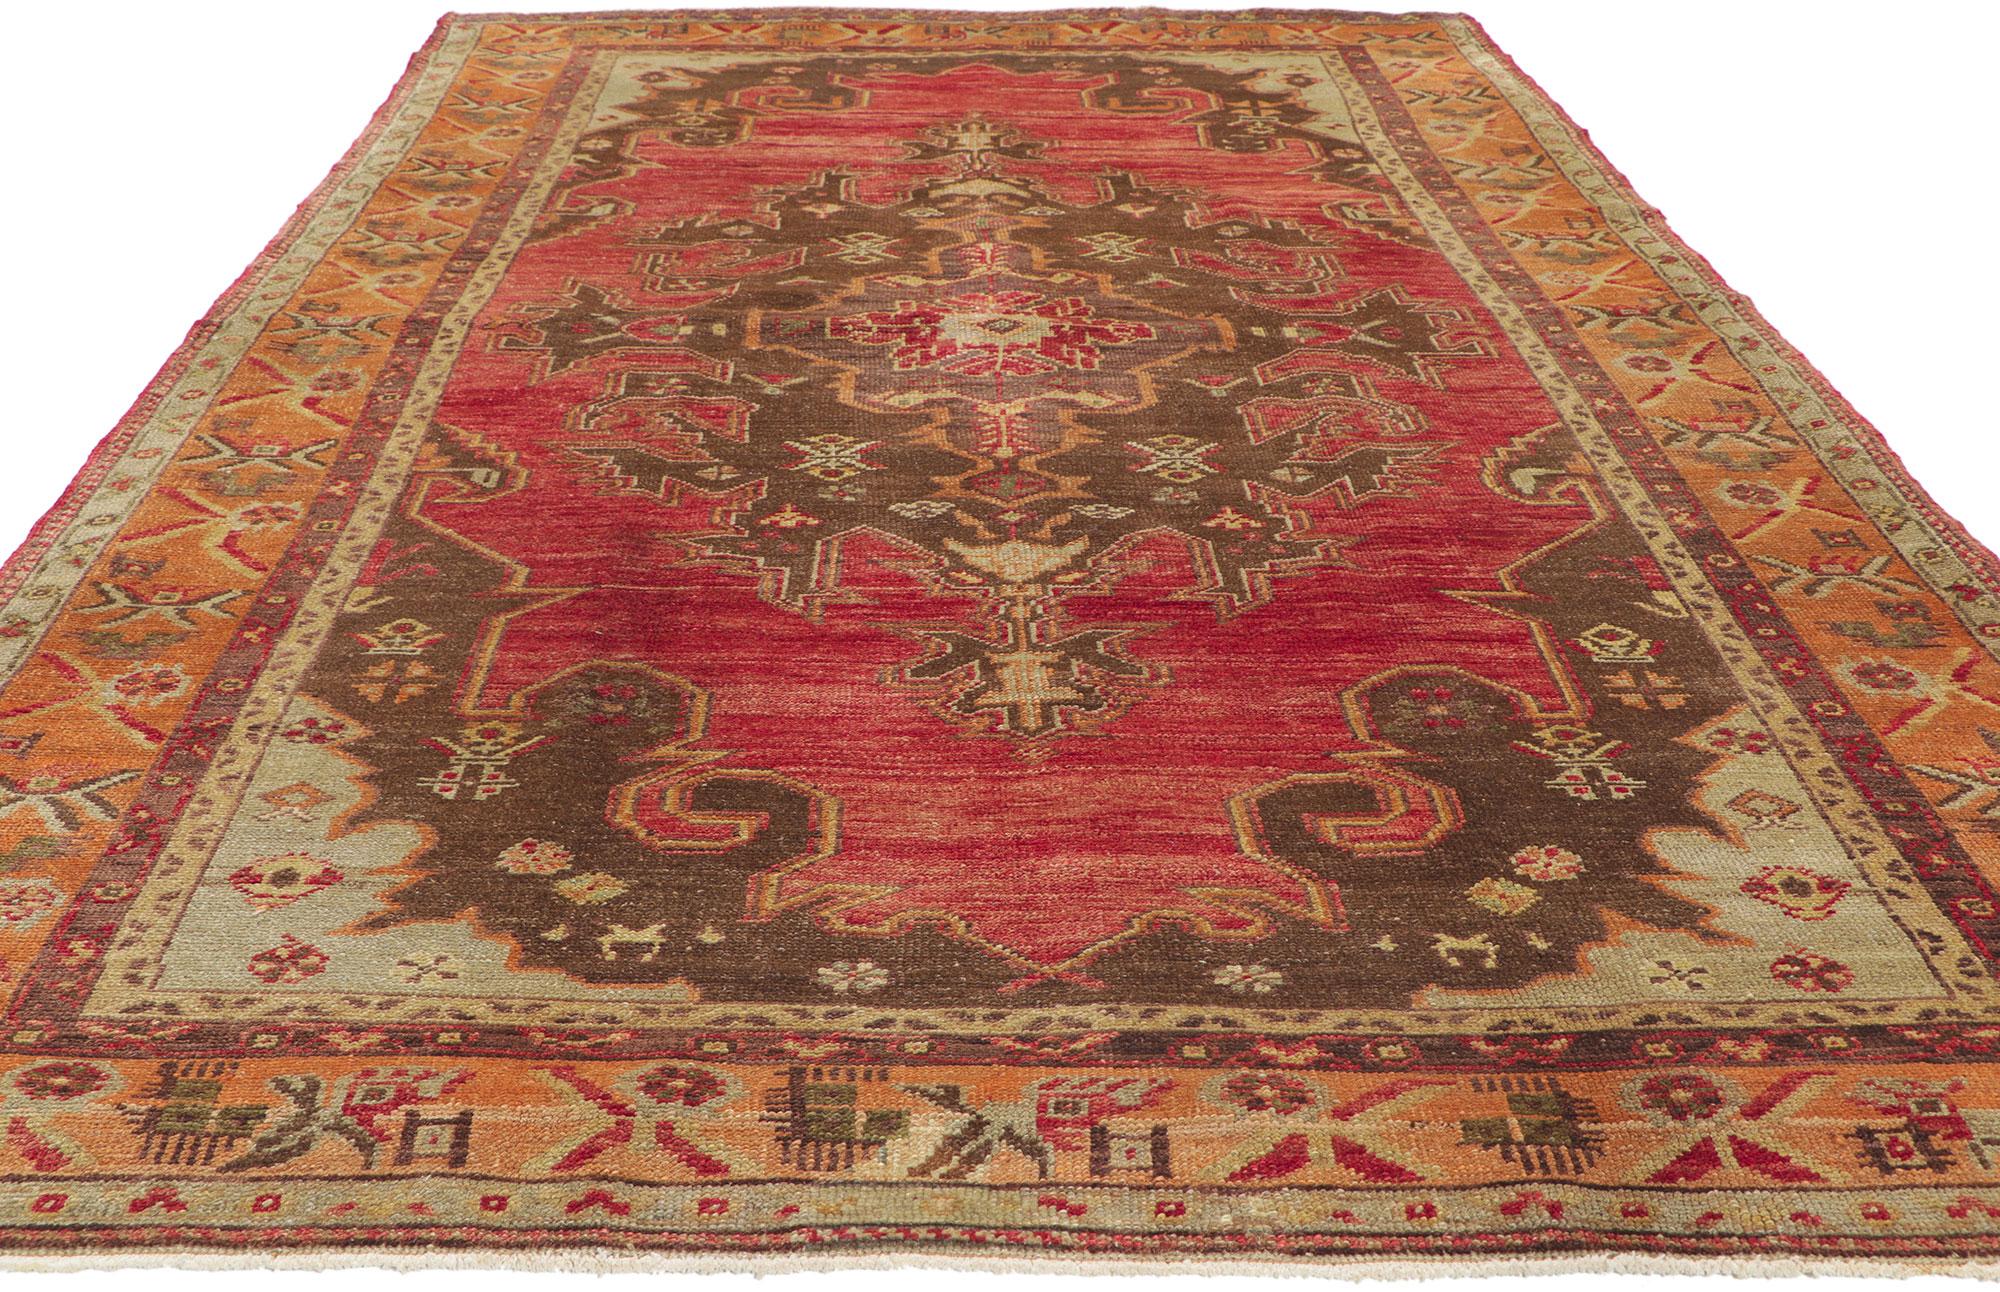 51130 Vintage Turkish Oushak rug, 05'02 x 08'09. Showcasing a traditional style, incredible detail and texture, this hand knotted wool vintage Turkish Oushak rug is a captivating vision of woven beauty. The timeless style and colorway woven into